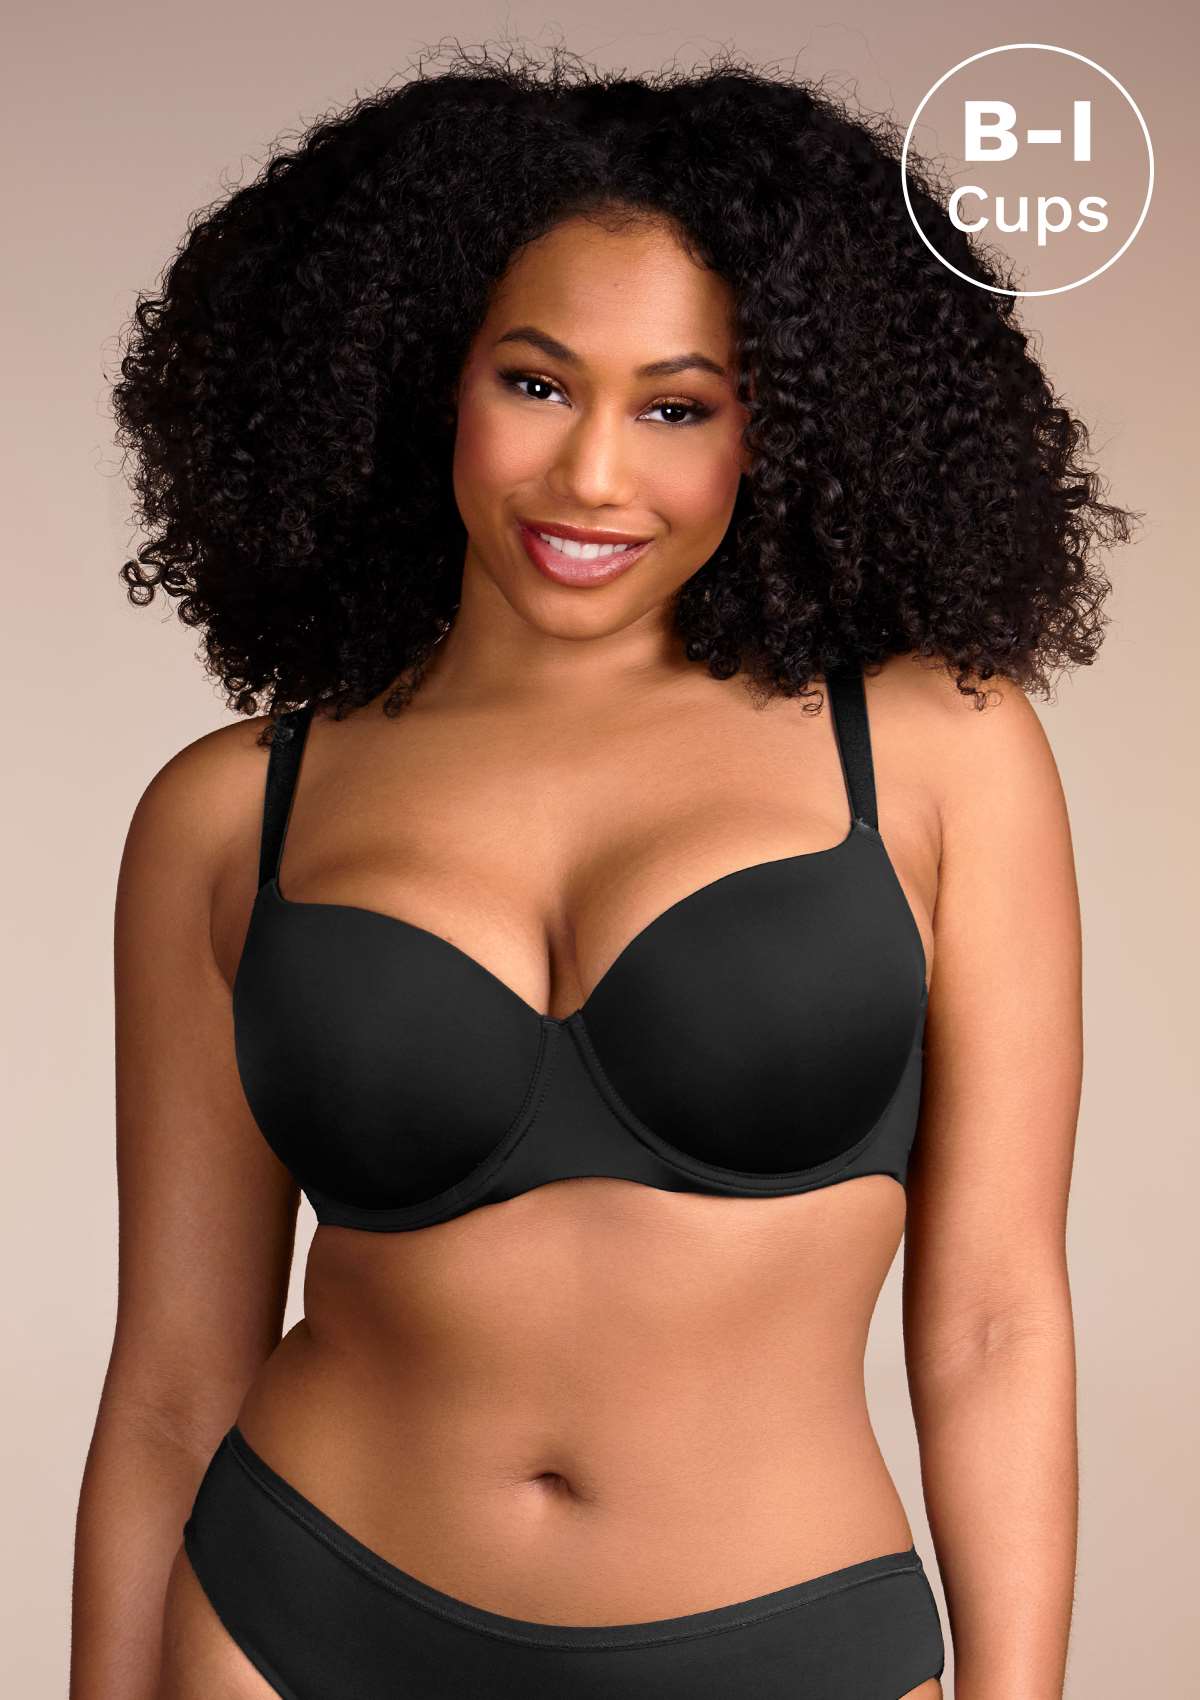 HSIA Gemma Smooth Padded T-shirt Everyday Bras - For Lift And Comfort - Black / 40 / C